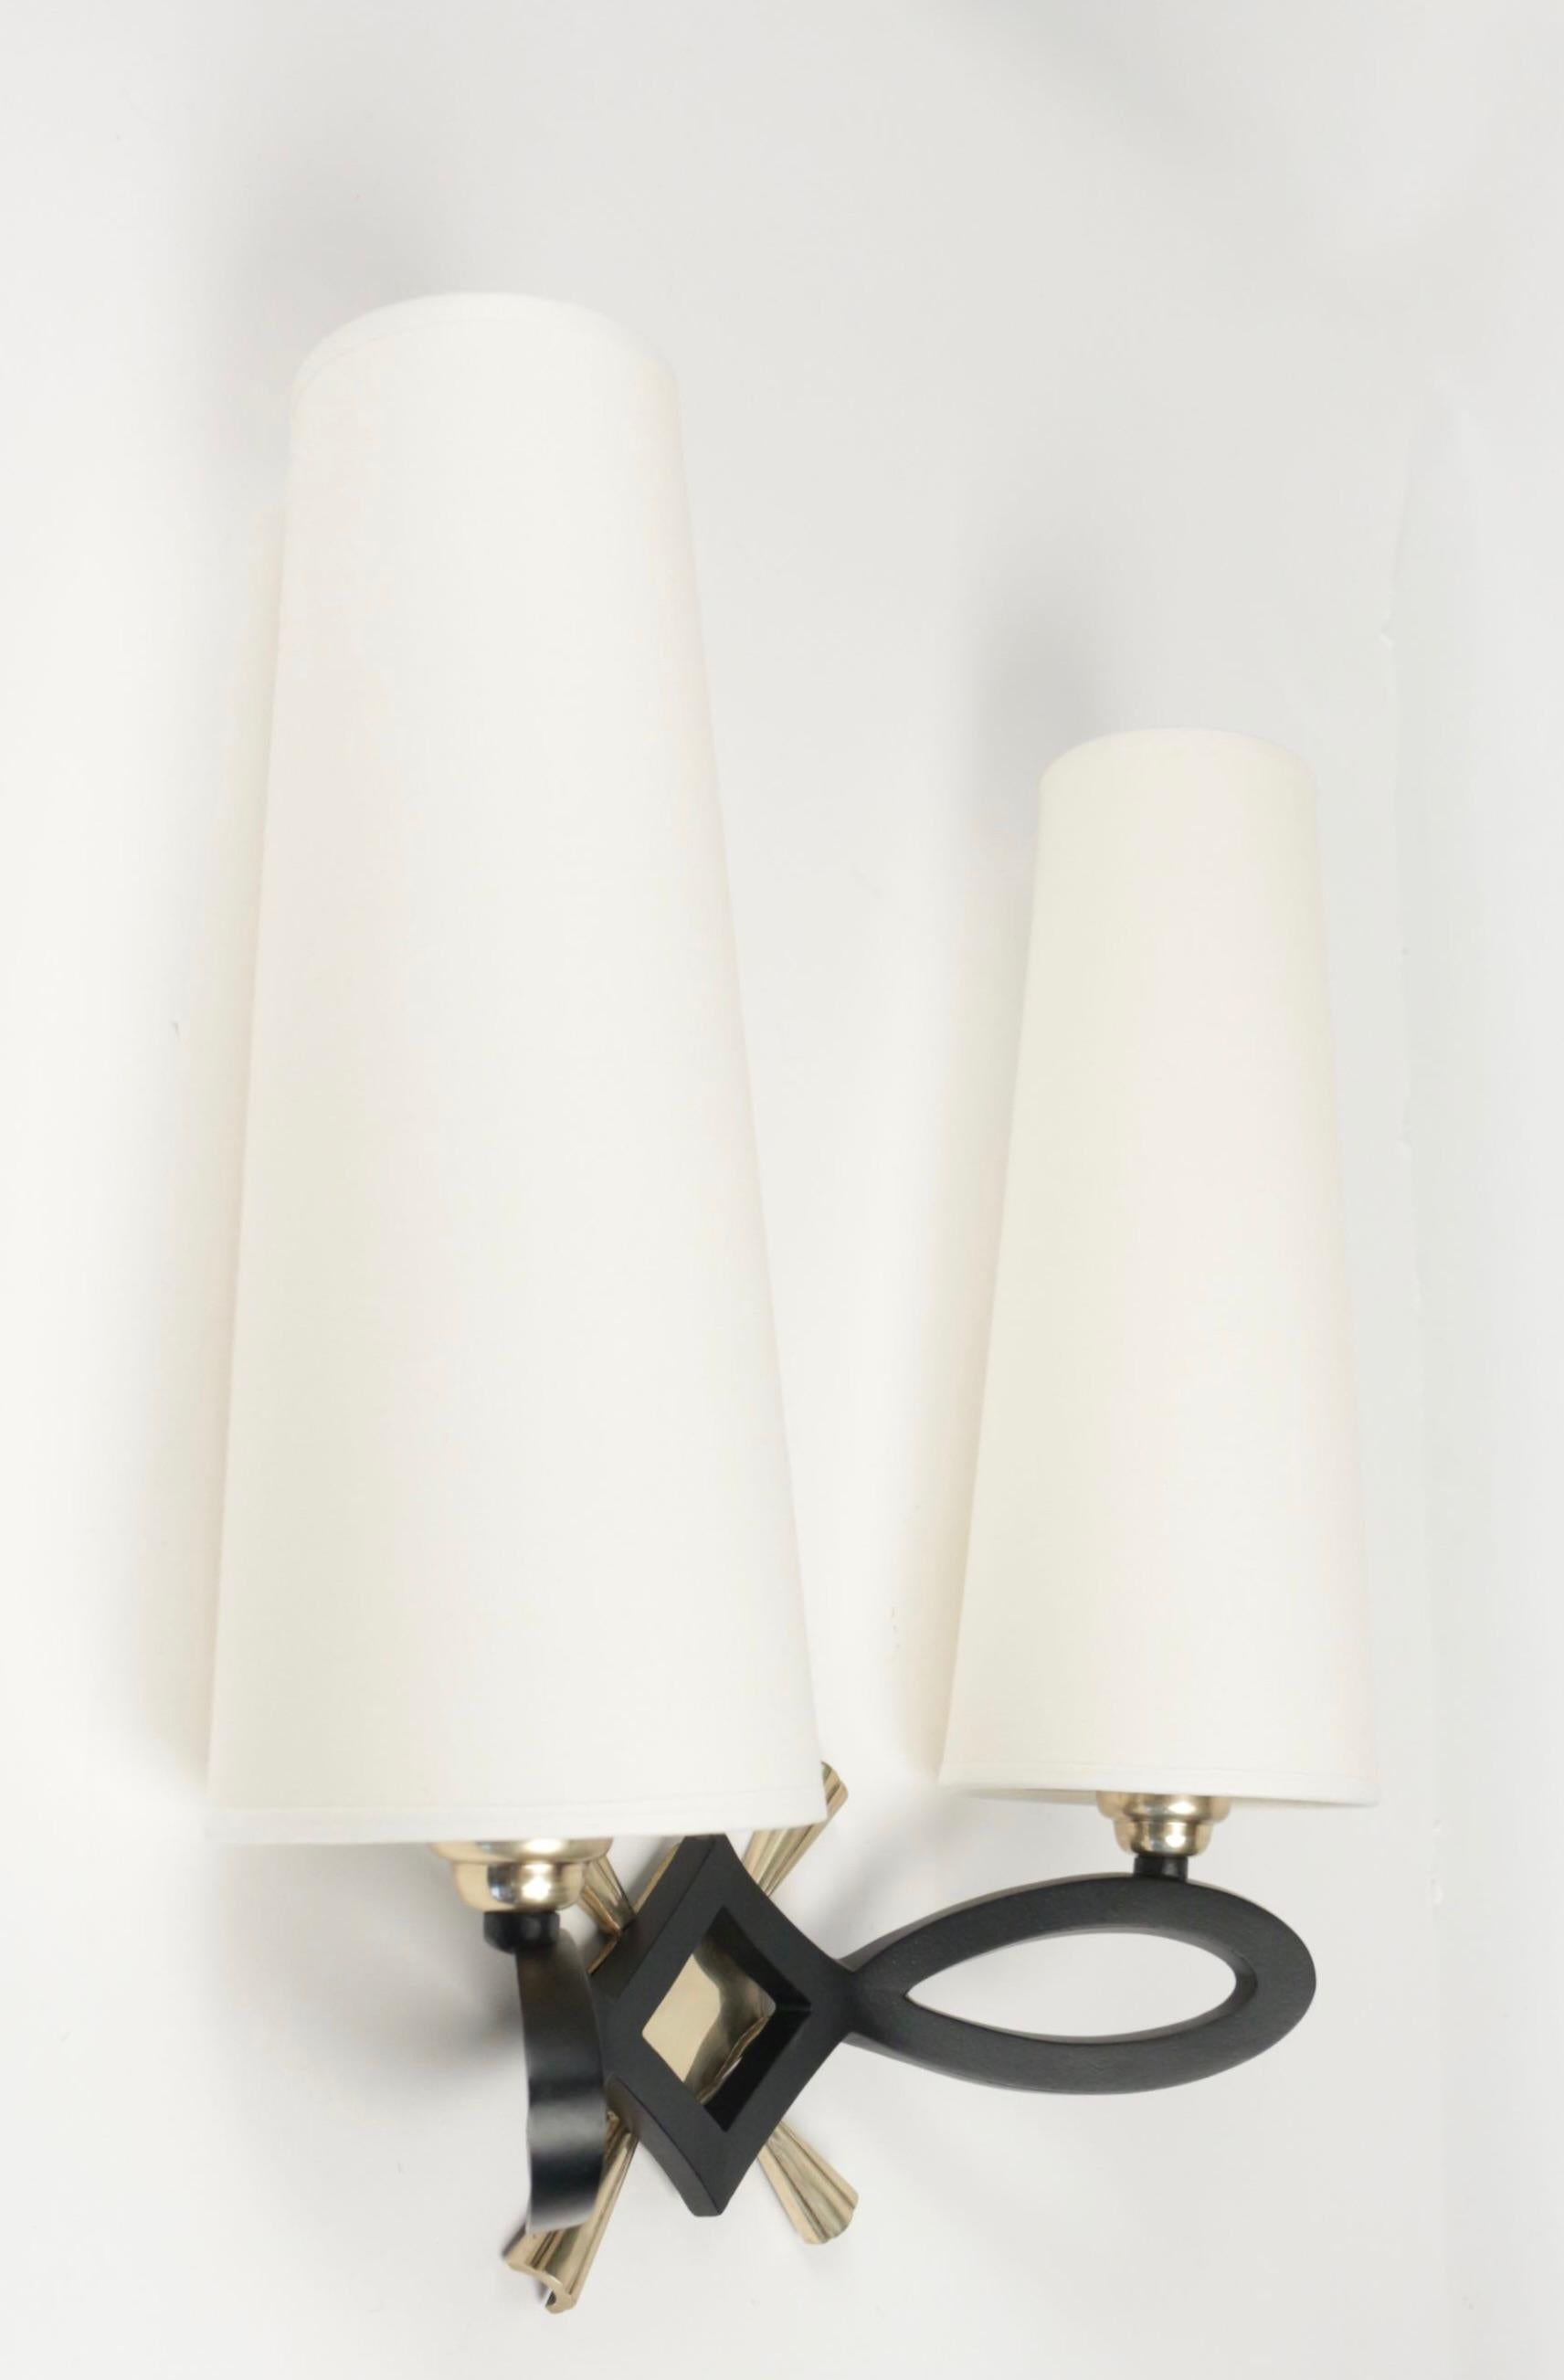 Each sconce is composed of two loops in black lacquered bronze underlined by a plate and a diamond-shaped cross in gilded brass serving as a wall support. 
They are dressed with two lampshades in off-white cotton redone identically distributed on